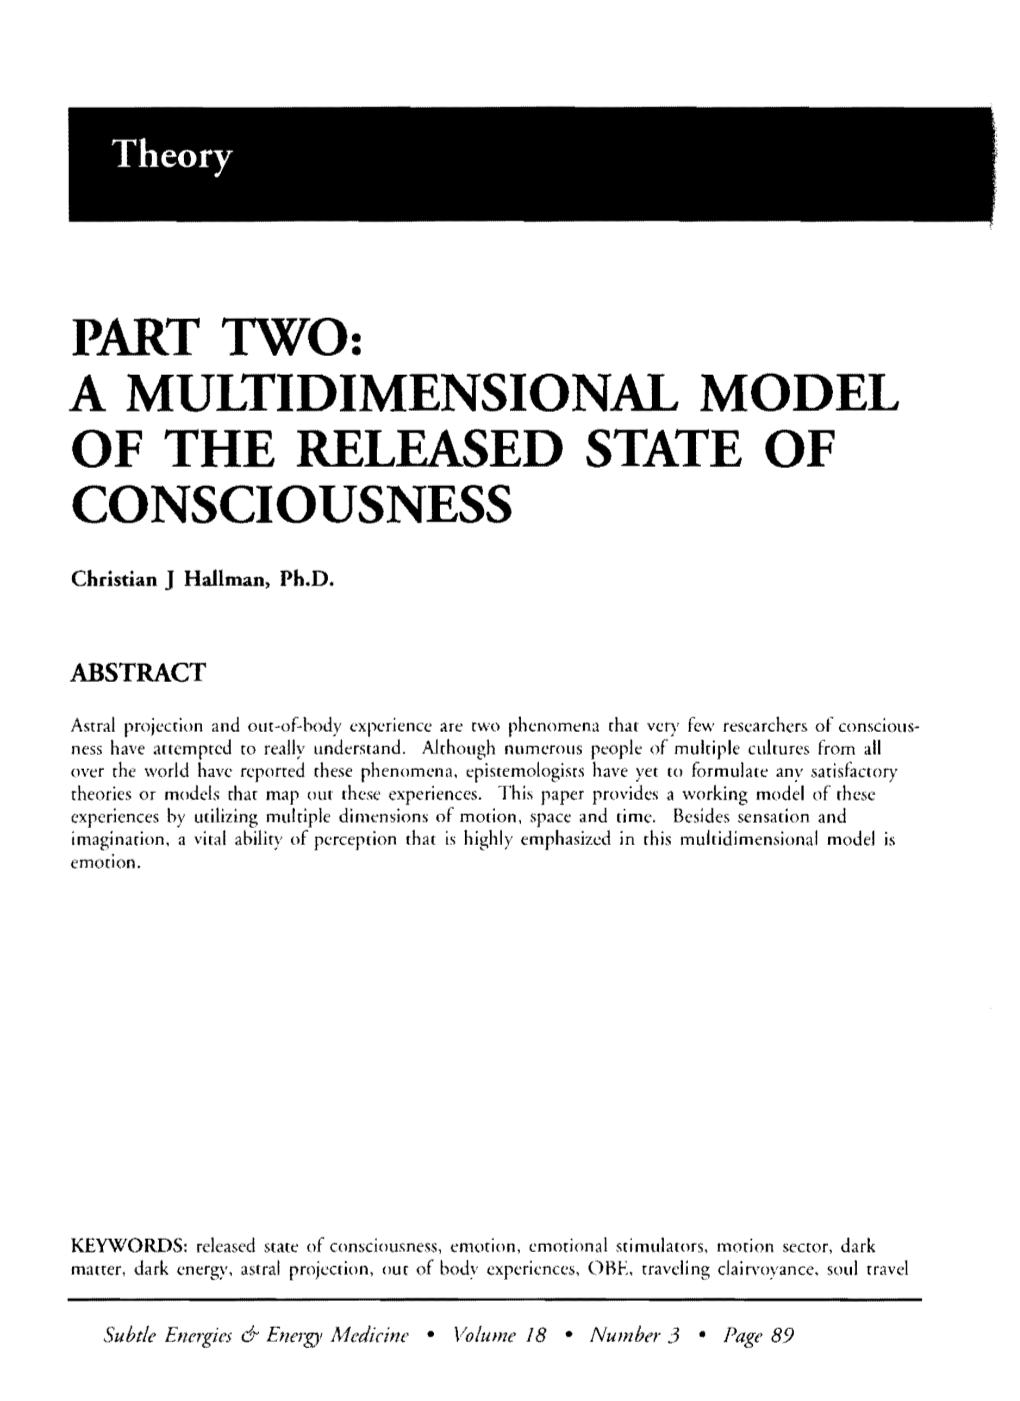 Part Two: a Multidimensional Model of the Released State of Consciousness